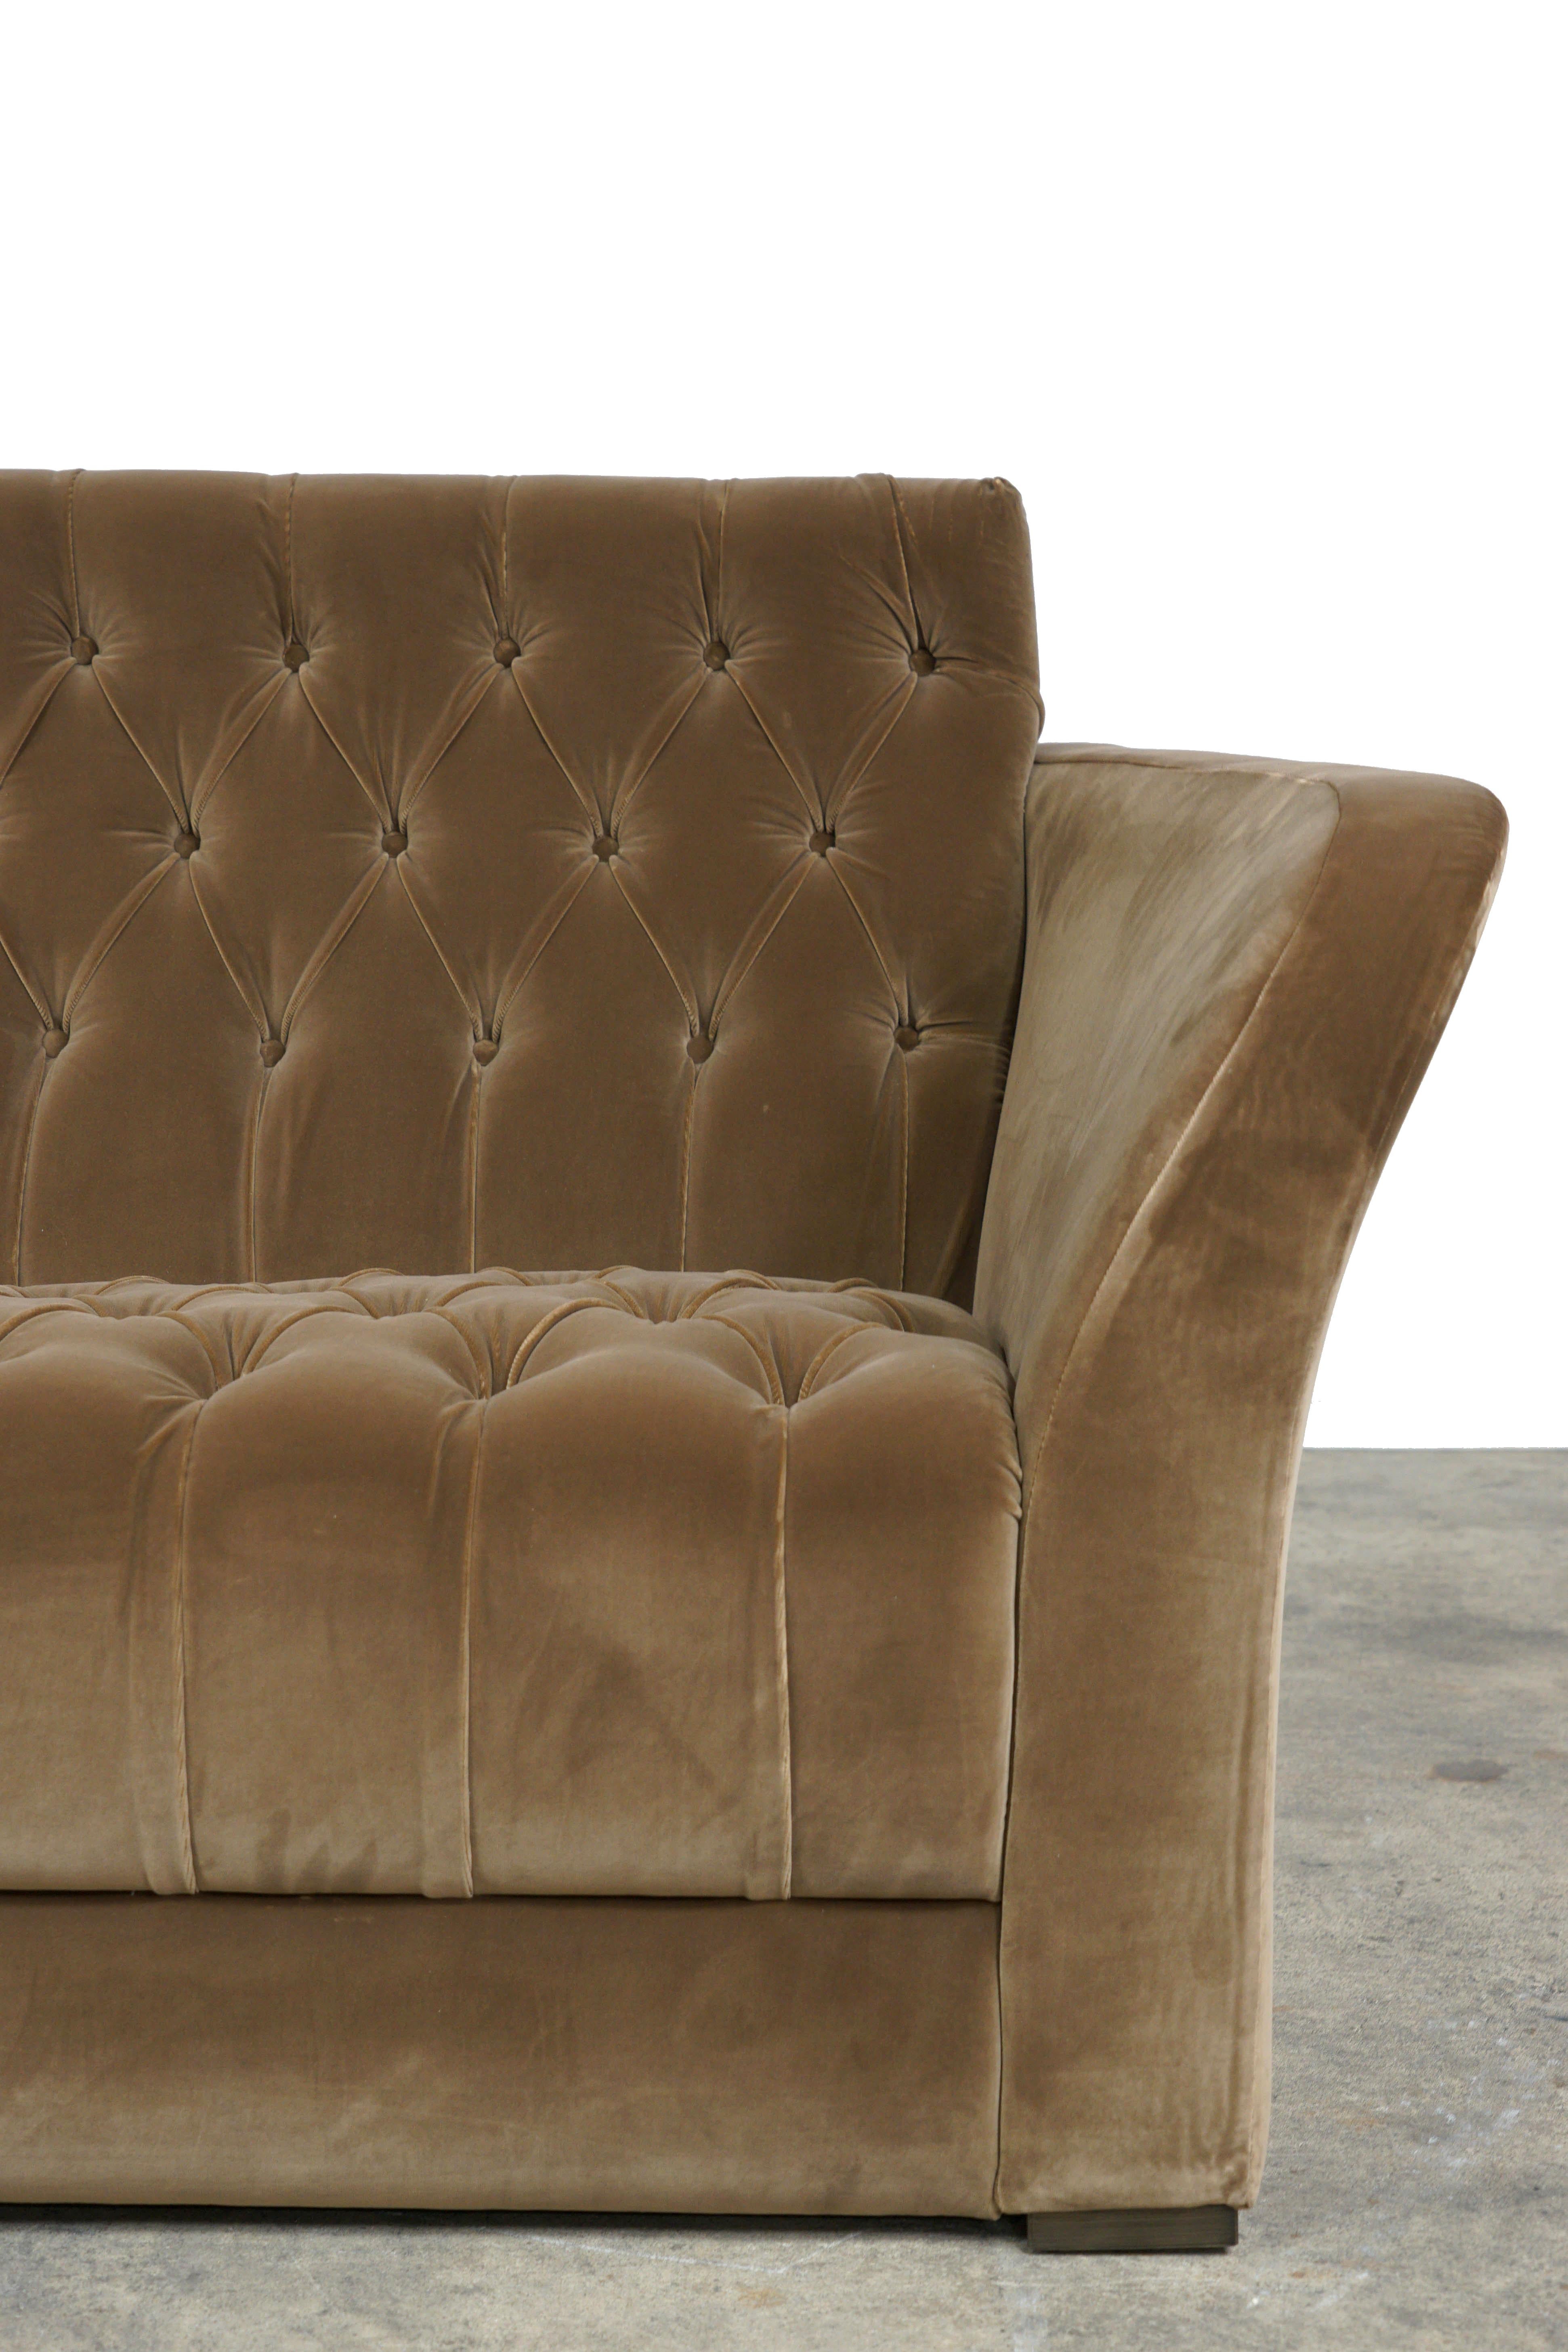 The Rivoli is upholstered in dark taupe velvet with tufted back and seat. With arms gently curving outwards, the sofa feels warm and inviting. It is a transitional piece that brings in traditional elements while maintaining modern sensibilities.
   